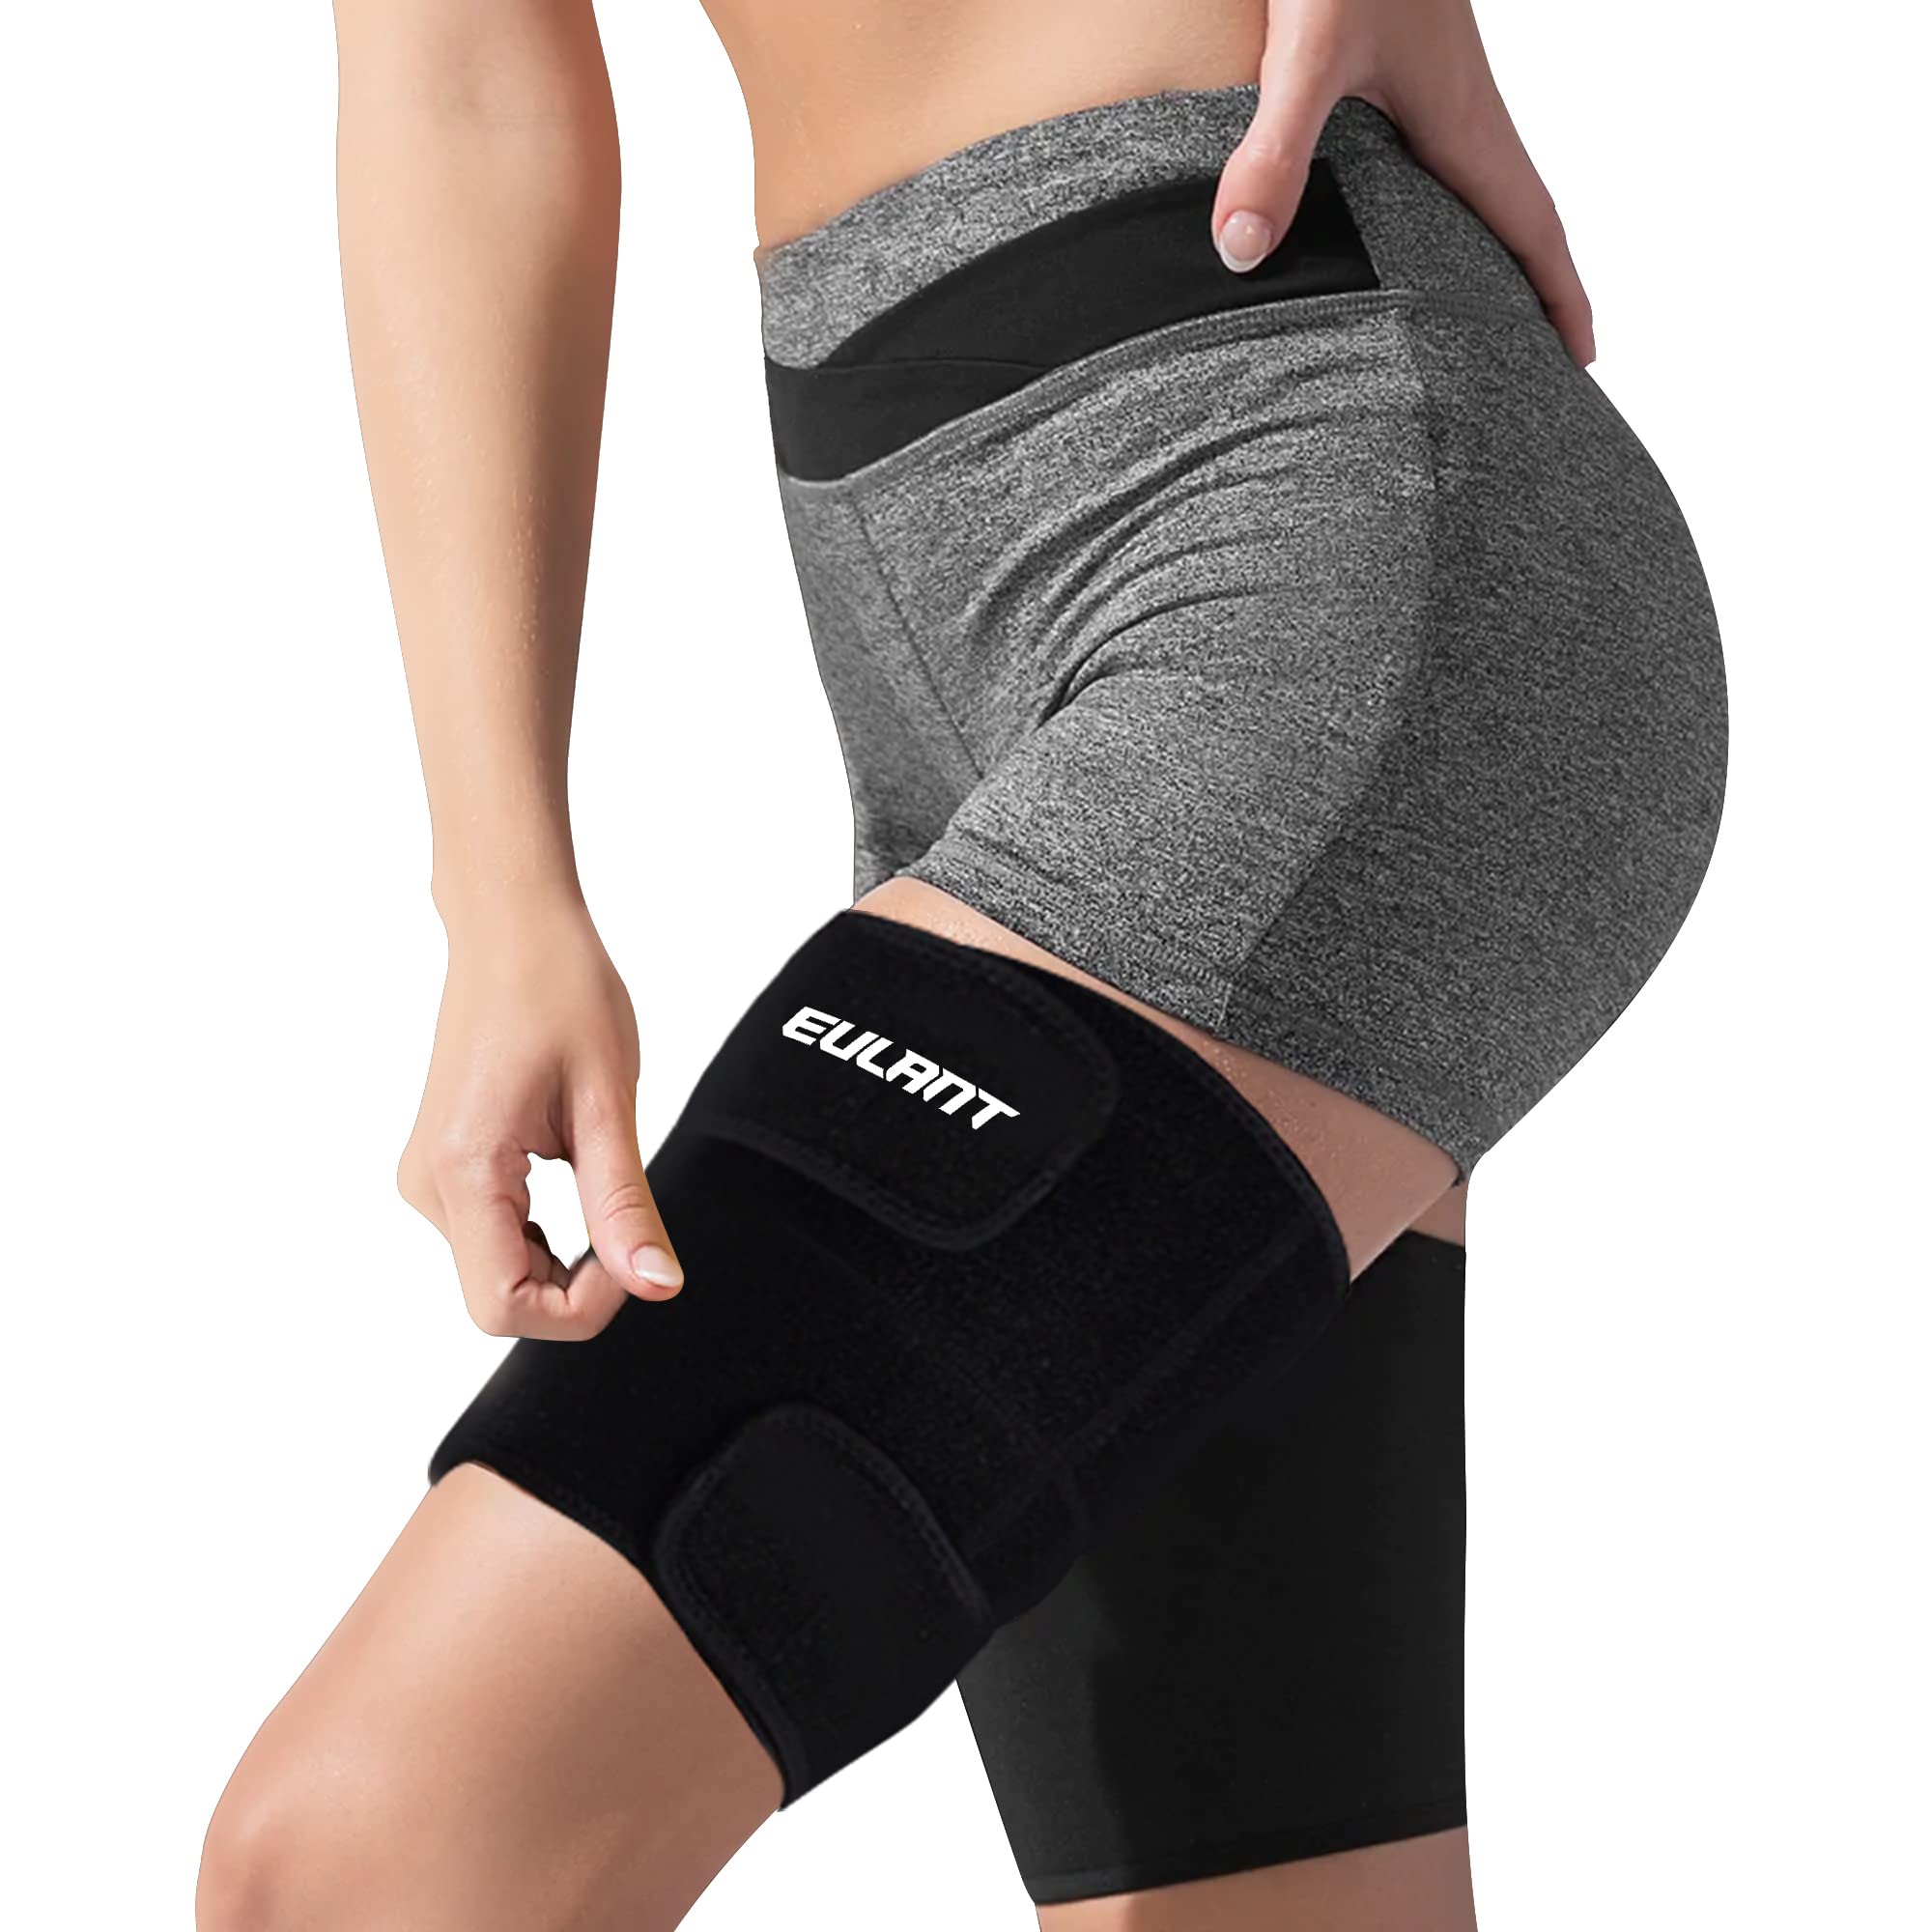 Thigh Brace Support Hamstring Compression Sleeve Running Pain